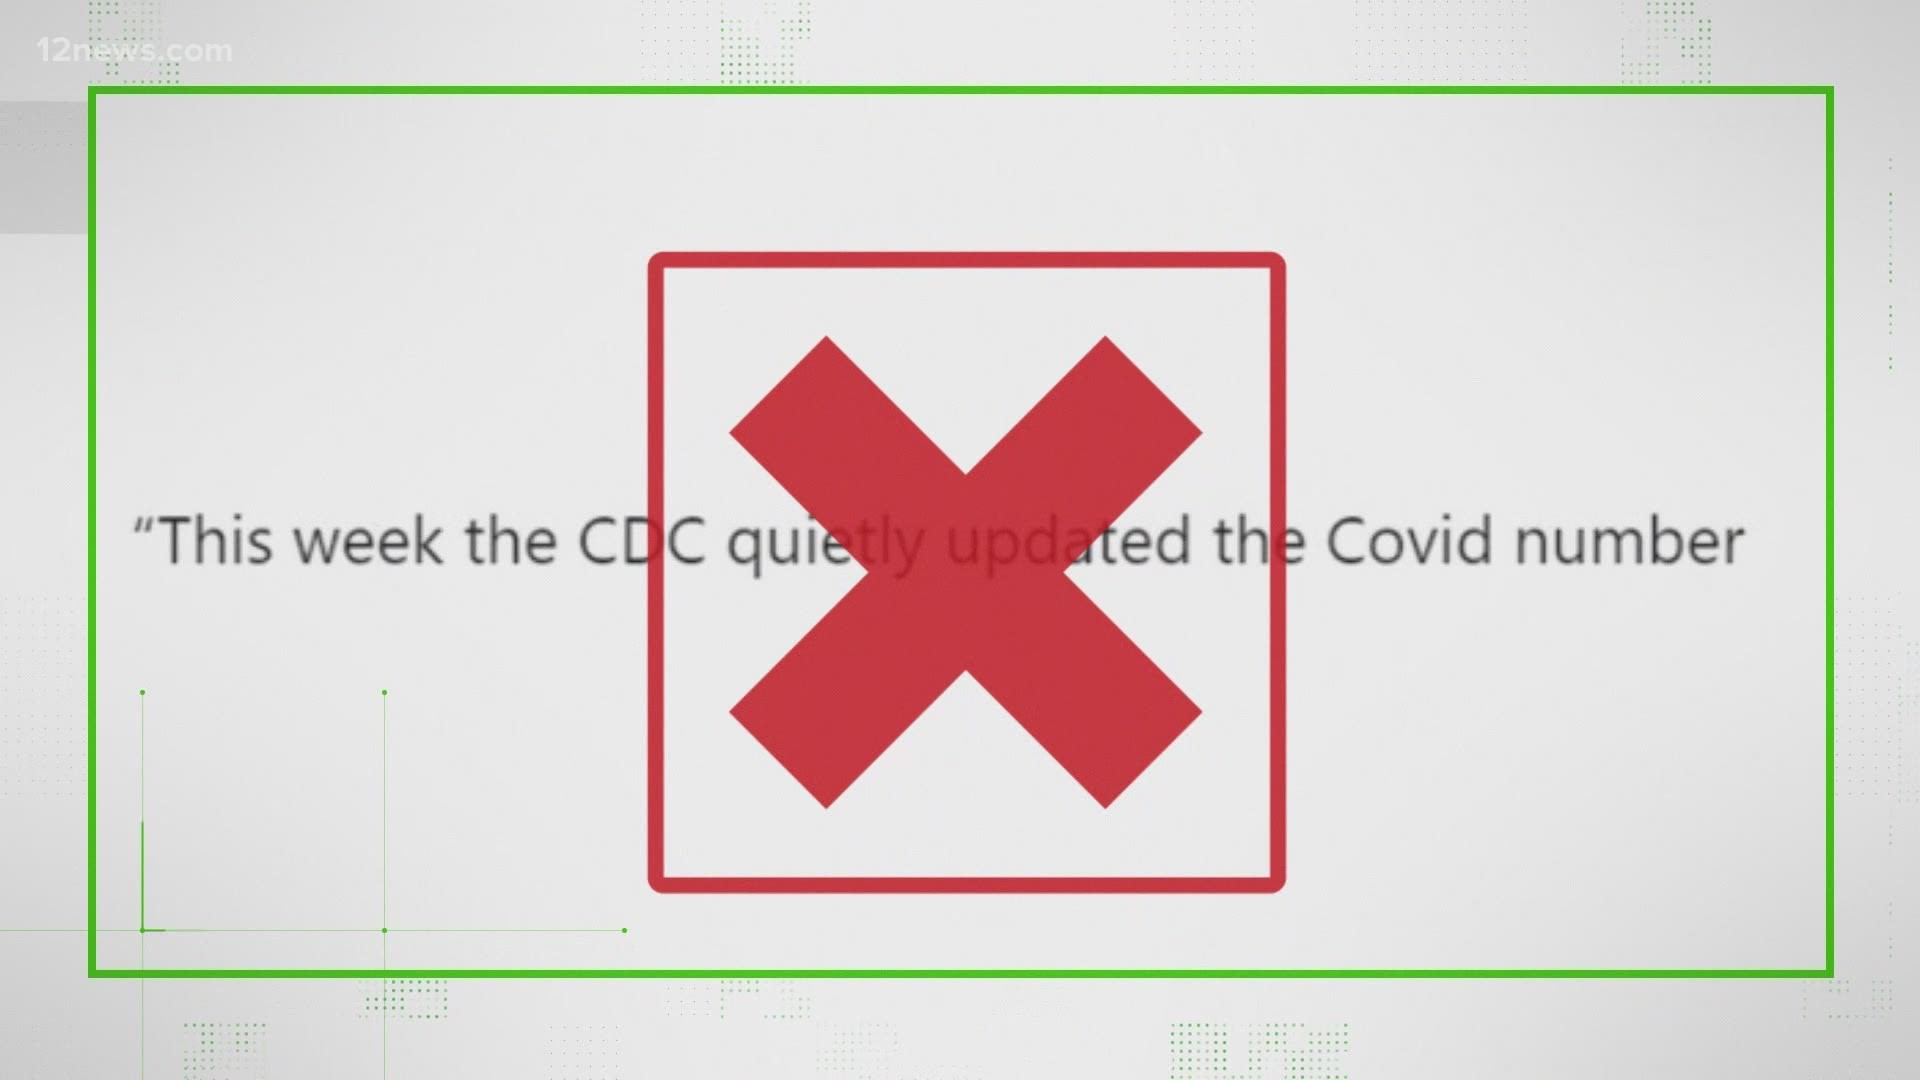 Rumors are swirling about a report from the CDC that gives a different perspective on COVID-related deaths. Our Verify team gives you the facts.